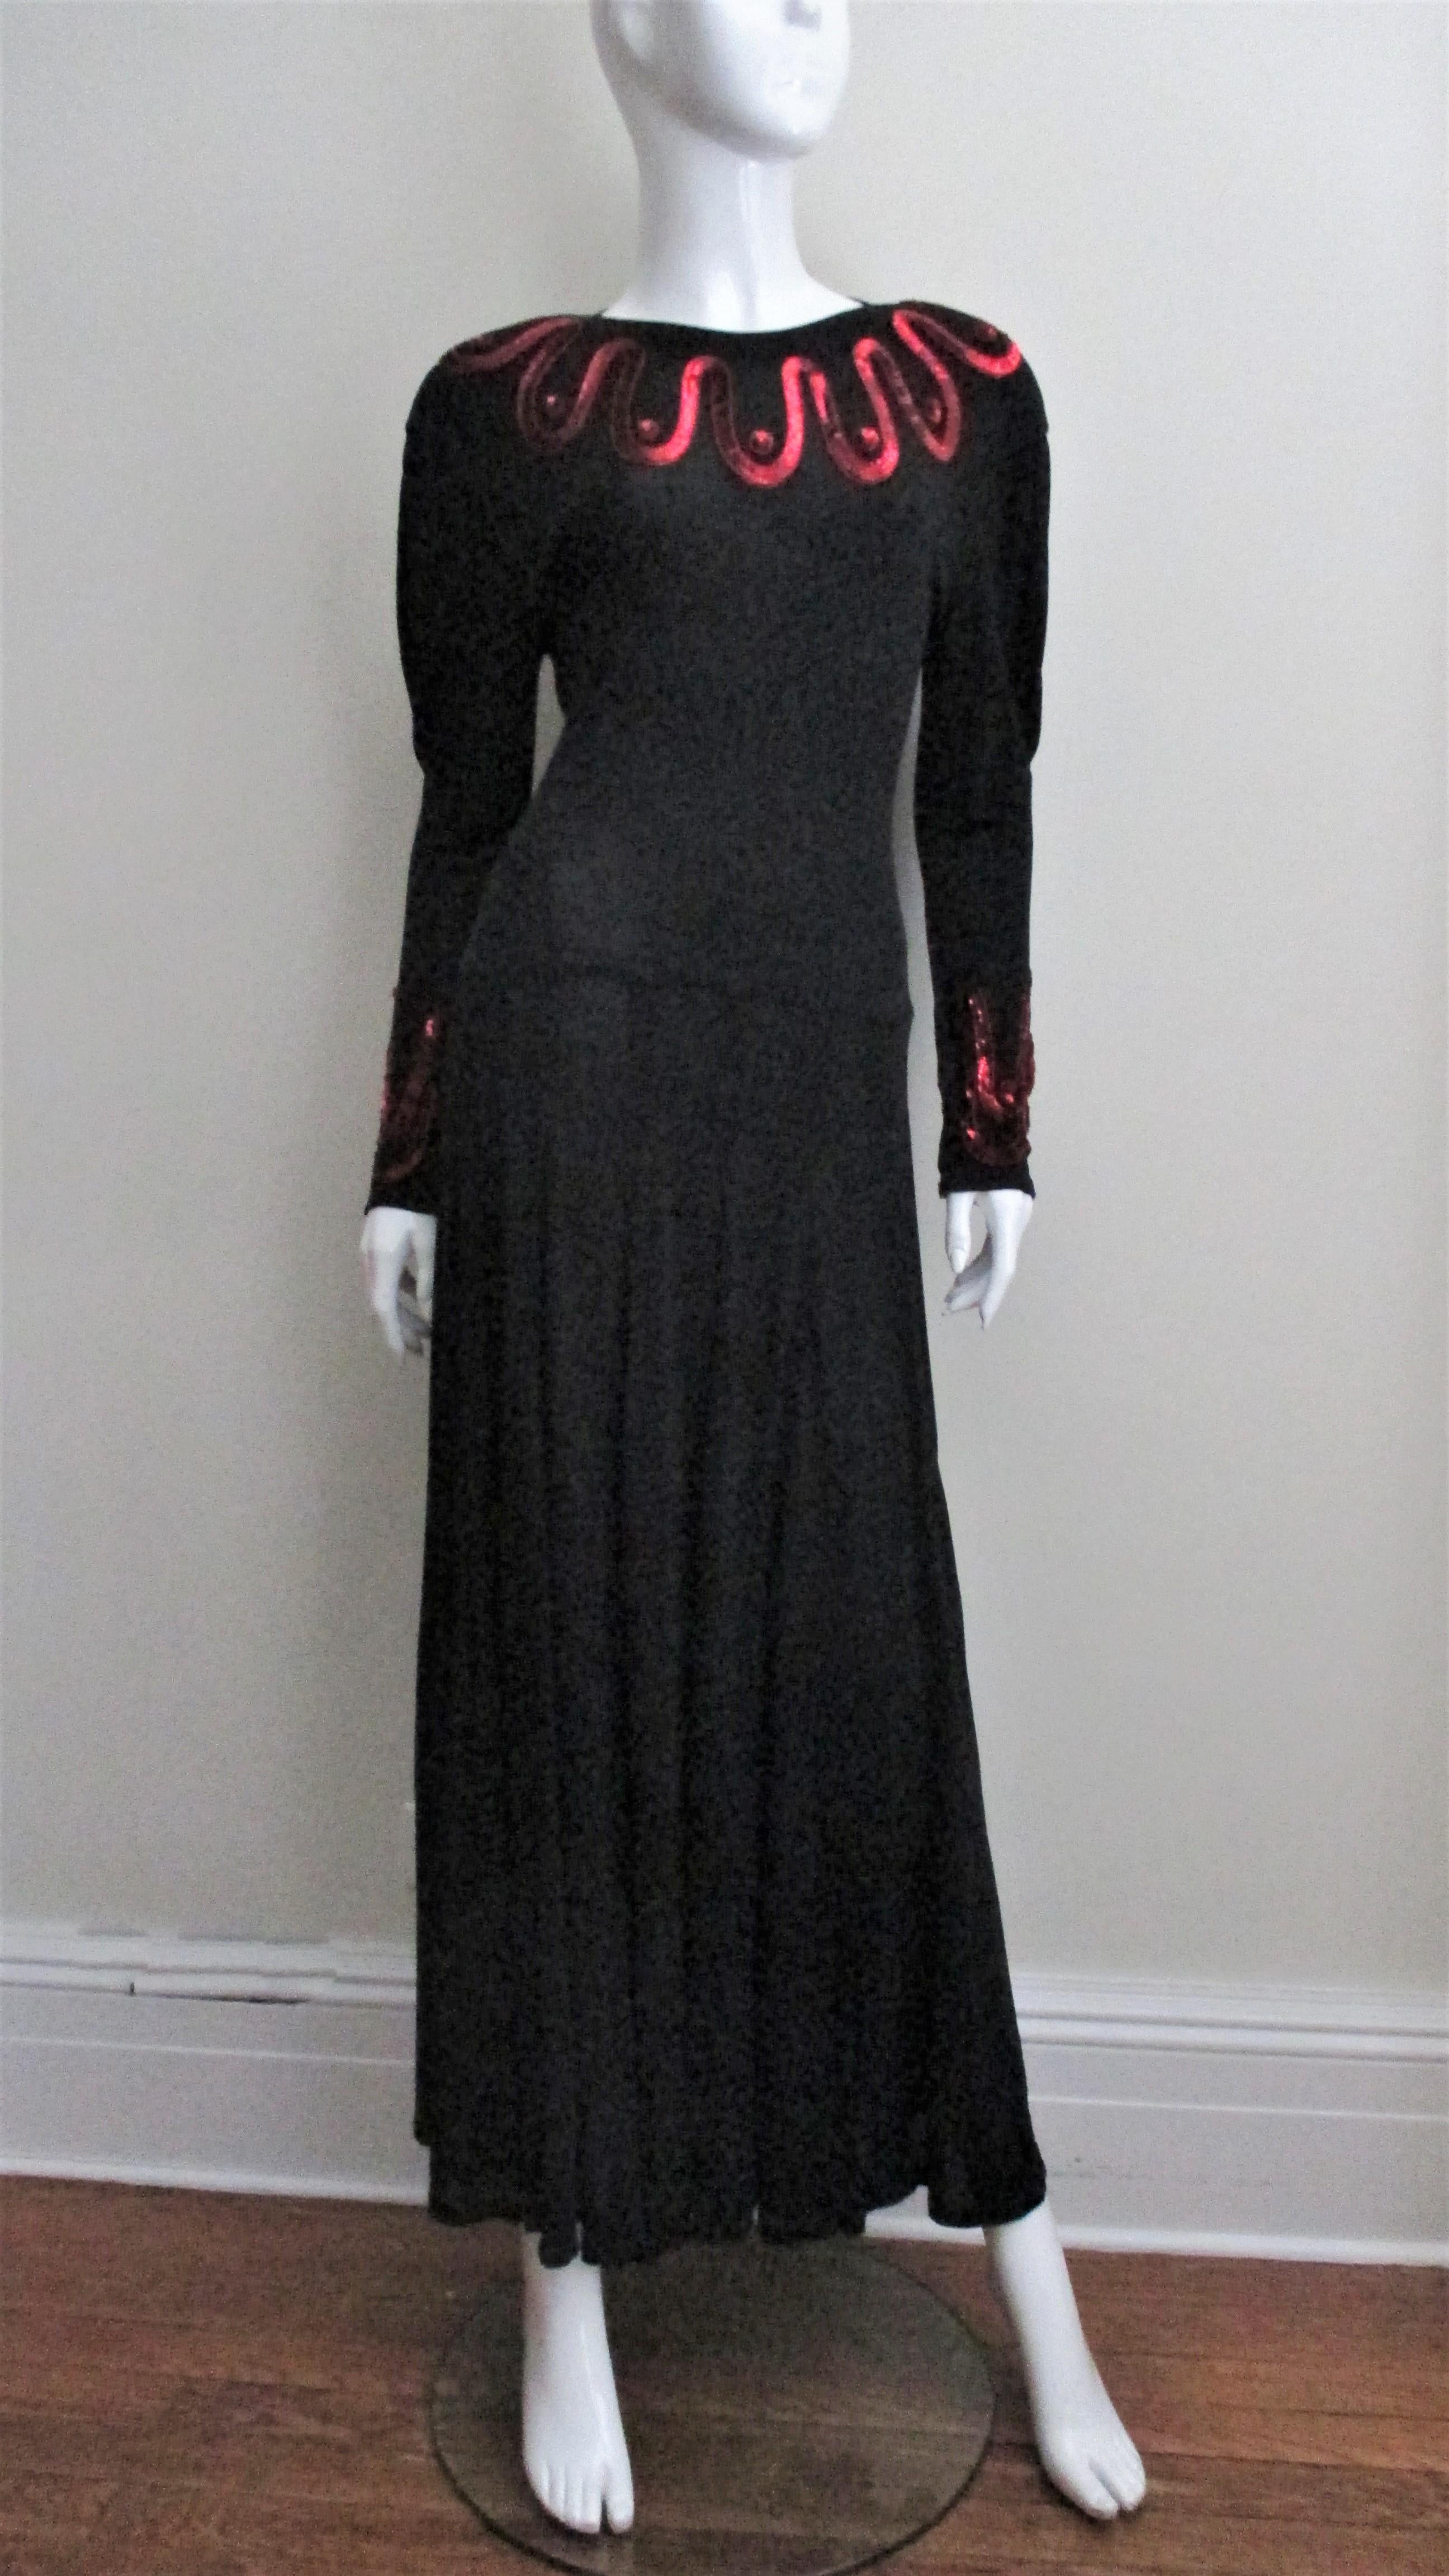 Beautiful rich black silk jersey dress from Jean Muir highlighted with waves of bright red sequins around the neck and cuffs.  It has lightly padded shoulders, slight dolman sleeves with an upper arm inverted pleat giving the upper arm a little